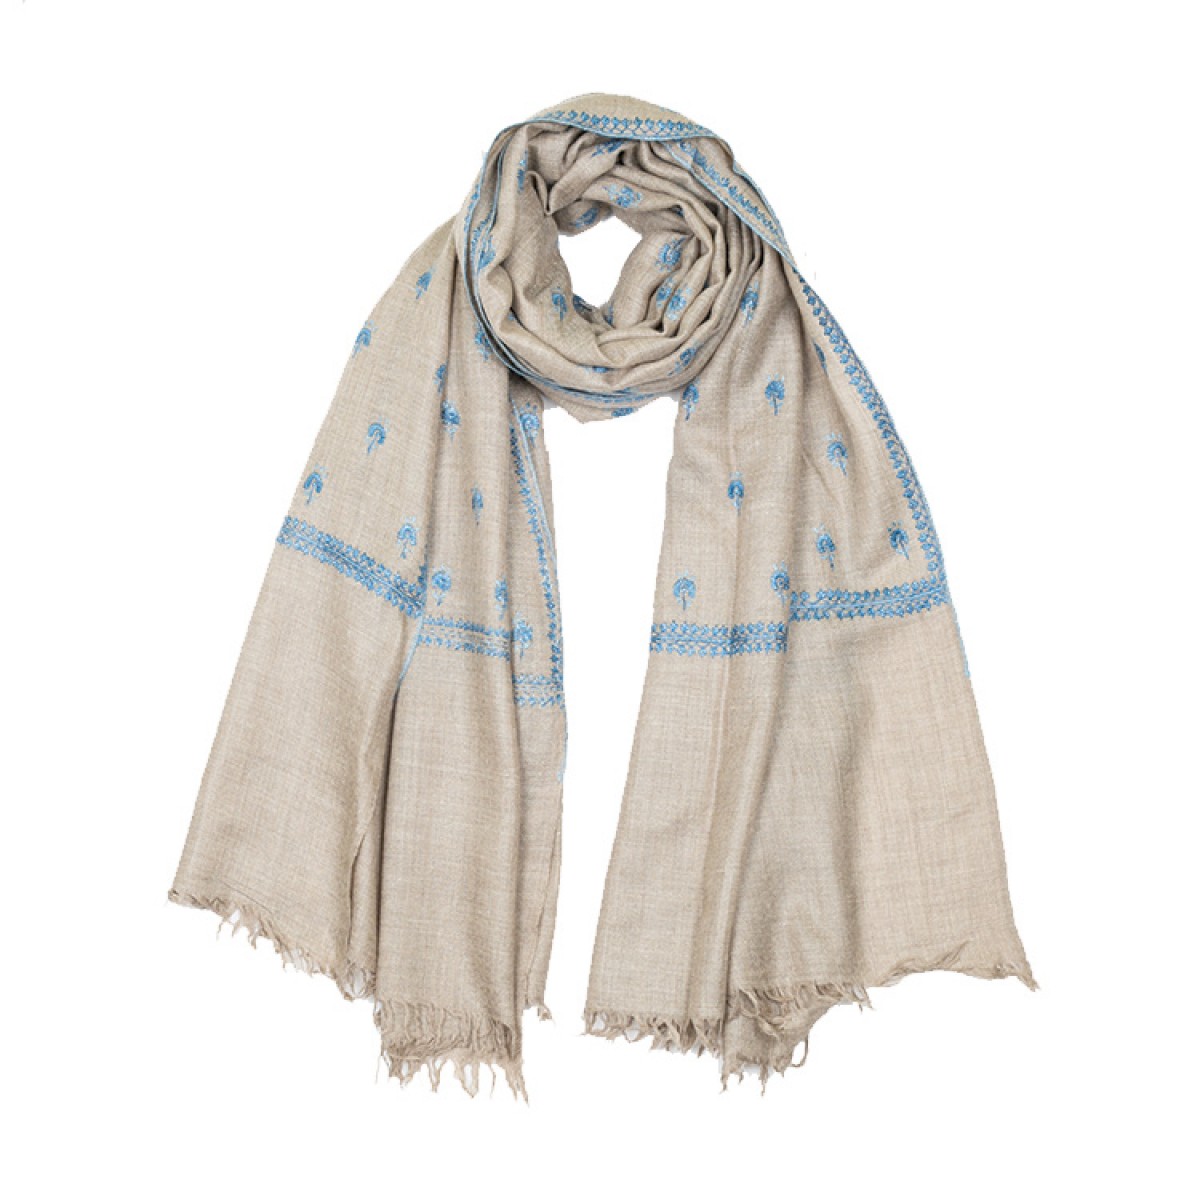 Embroidered Pashmina Stole - Natural & Blue